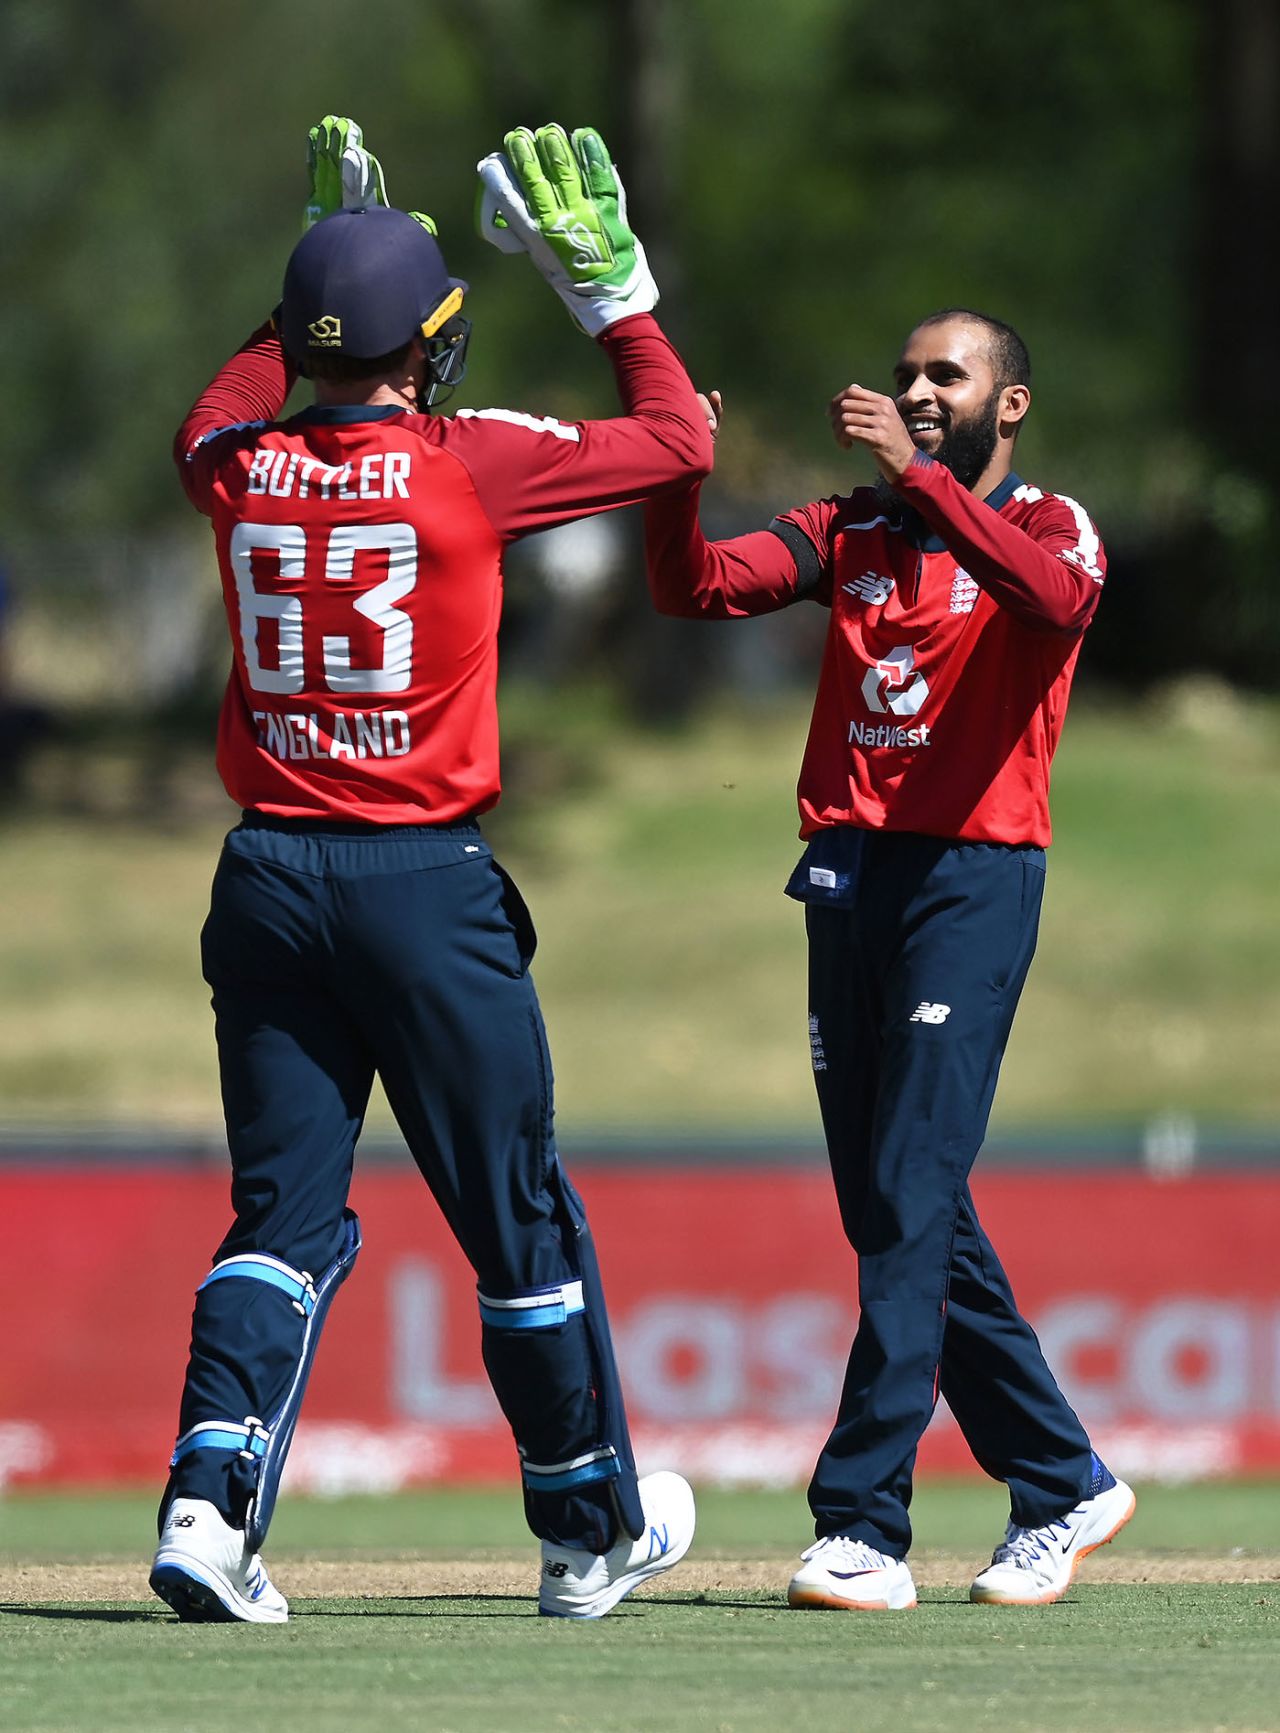 Adil Rashid celebrates with Jos Buttler, South Africa vs England, 2nd T20I, Paarl, November 29, 2020